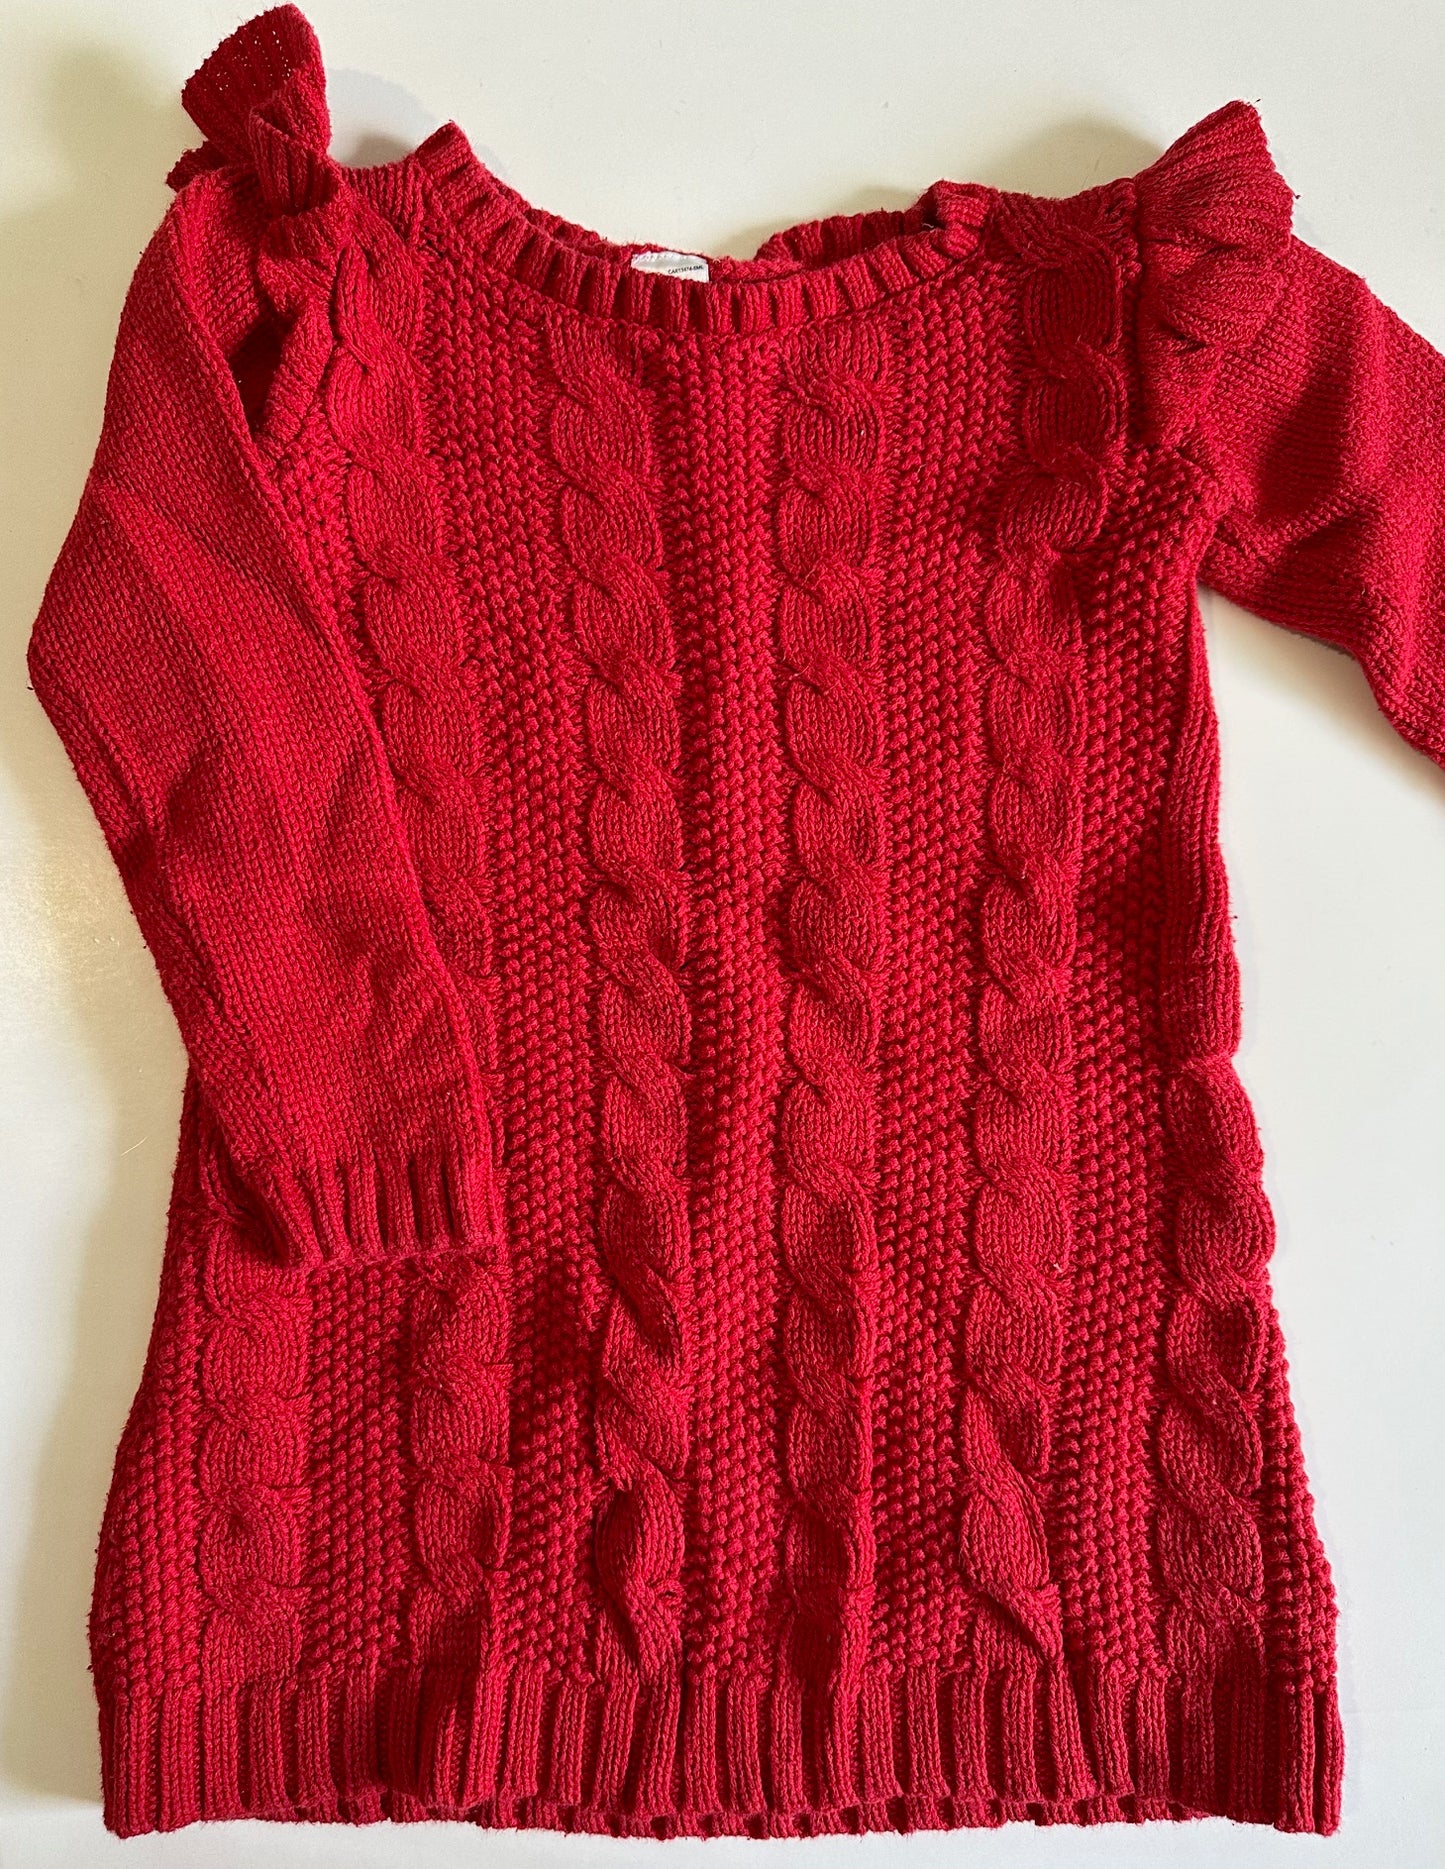 Carter's, Red Sweater Dress - Size 3T